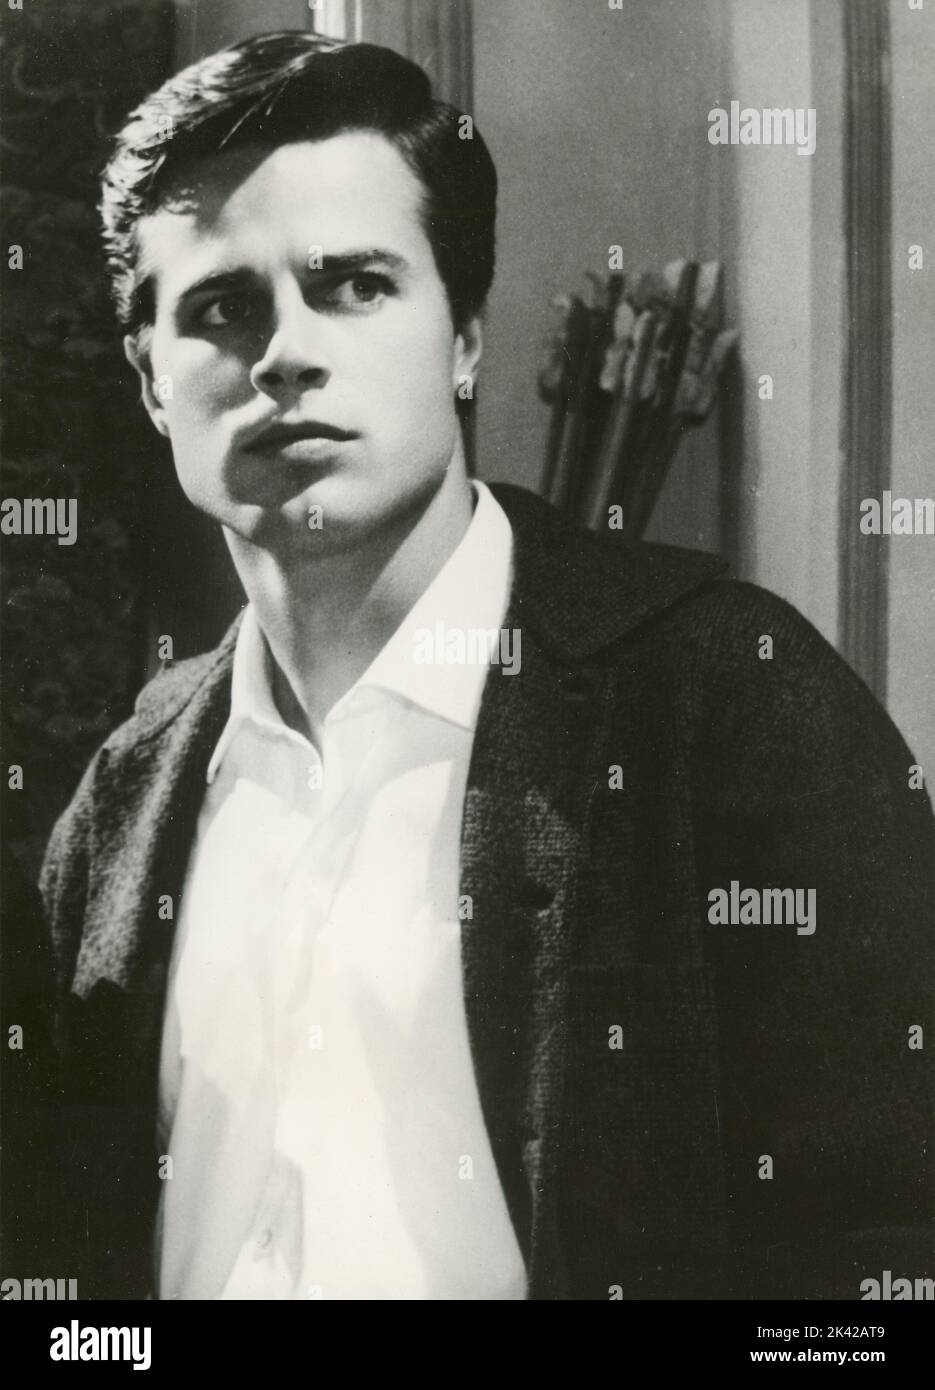 French actor Jean Sorel, France 1950s Stock Photo